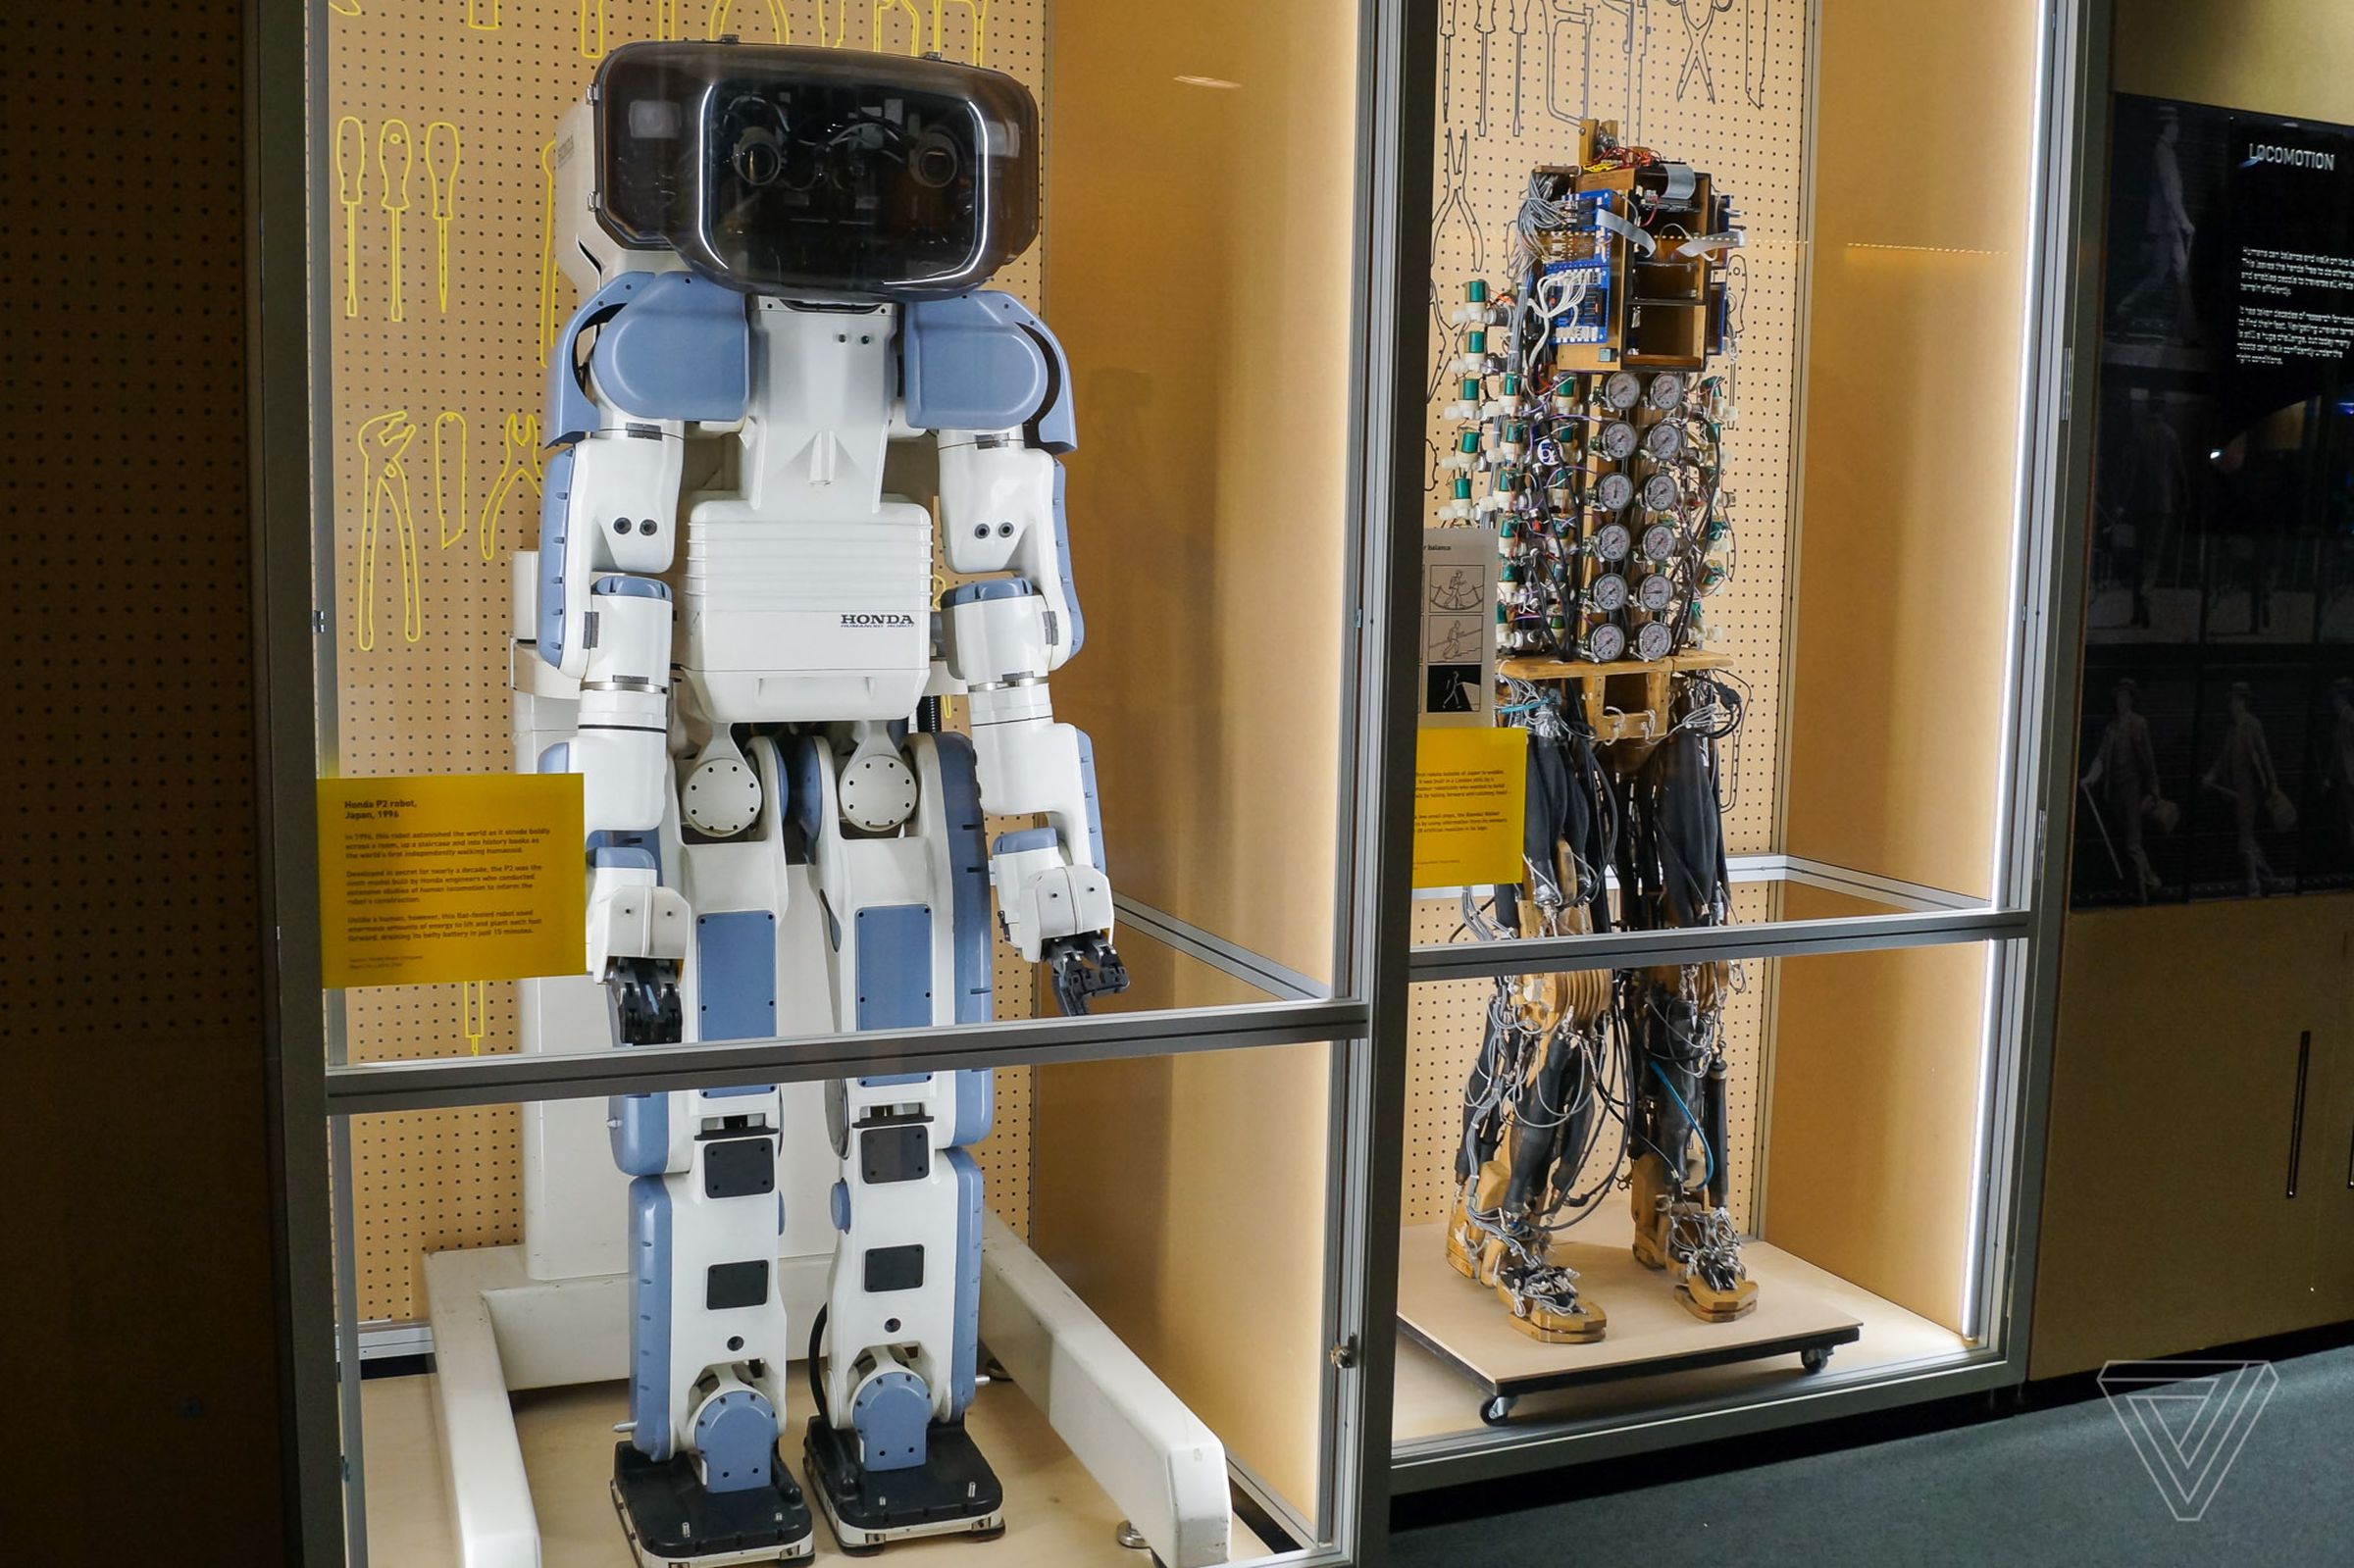 Robots in pictures: London Science Museum